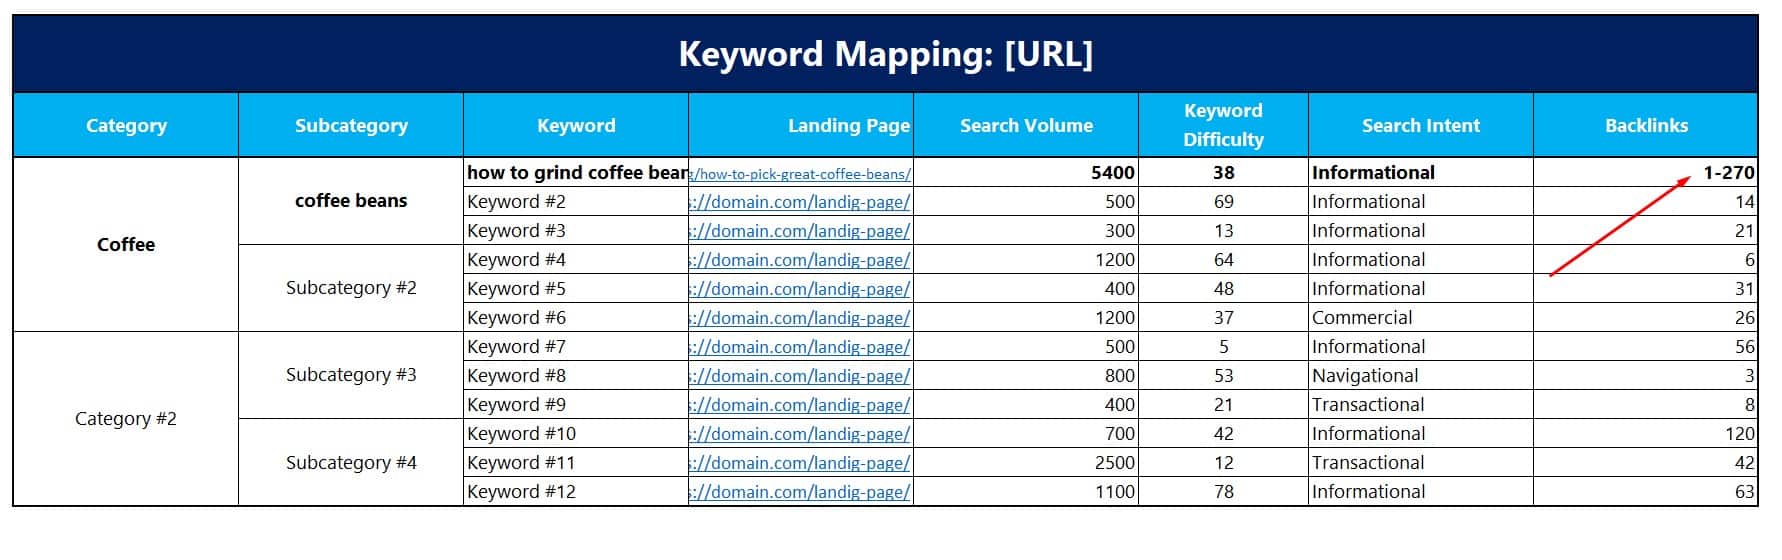 number of referring domains in seo keyword mapping template for keyword